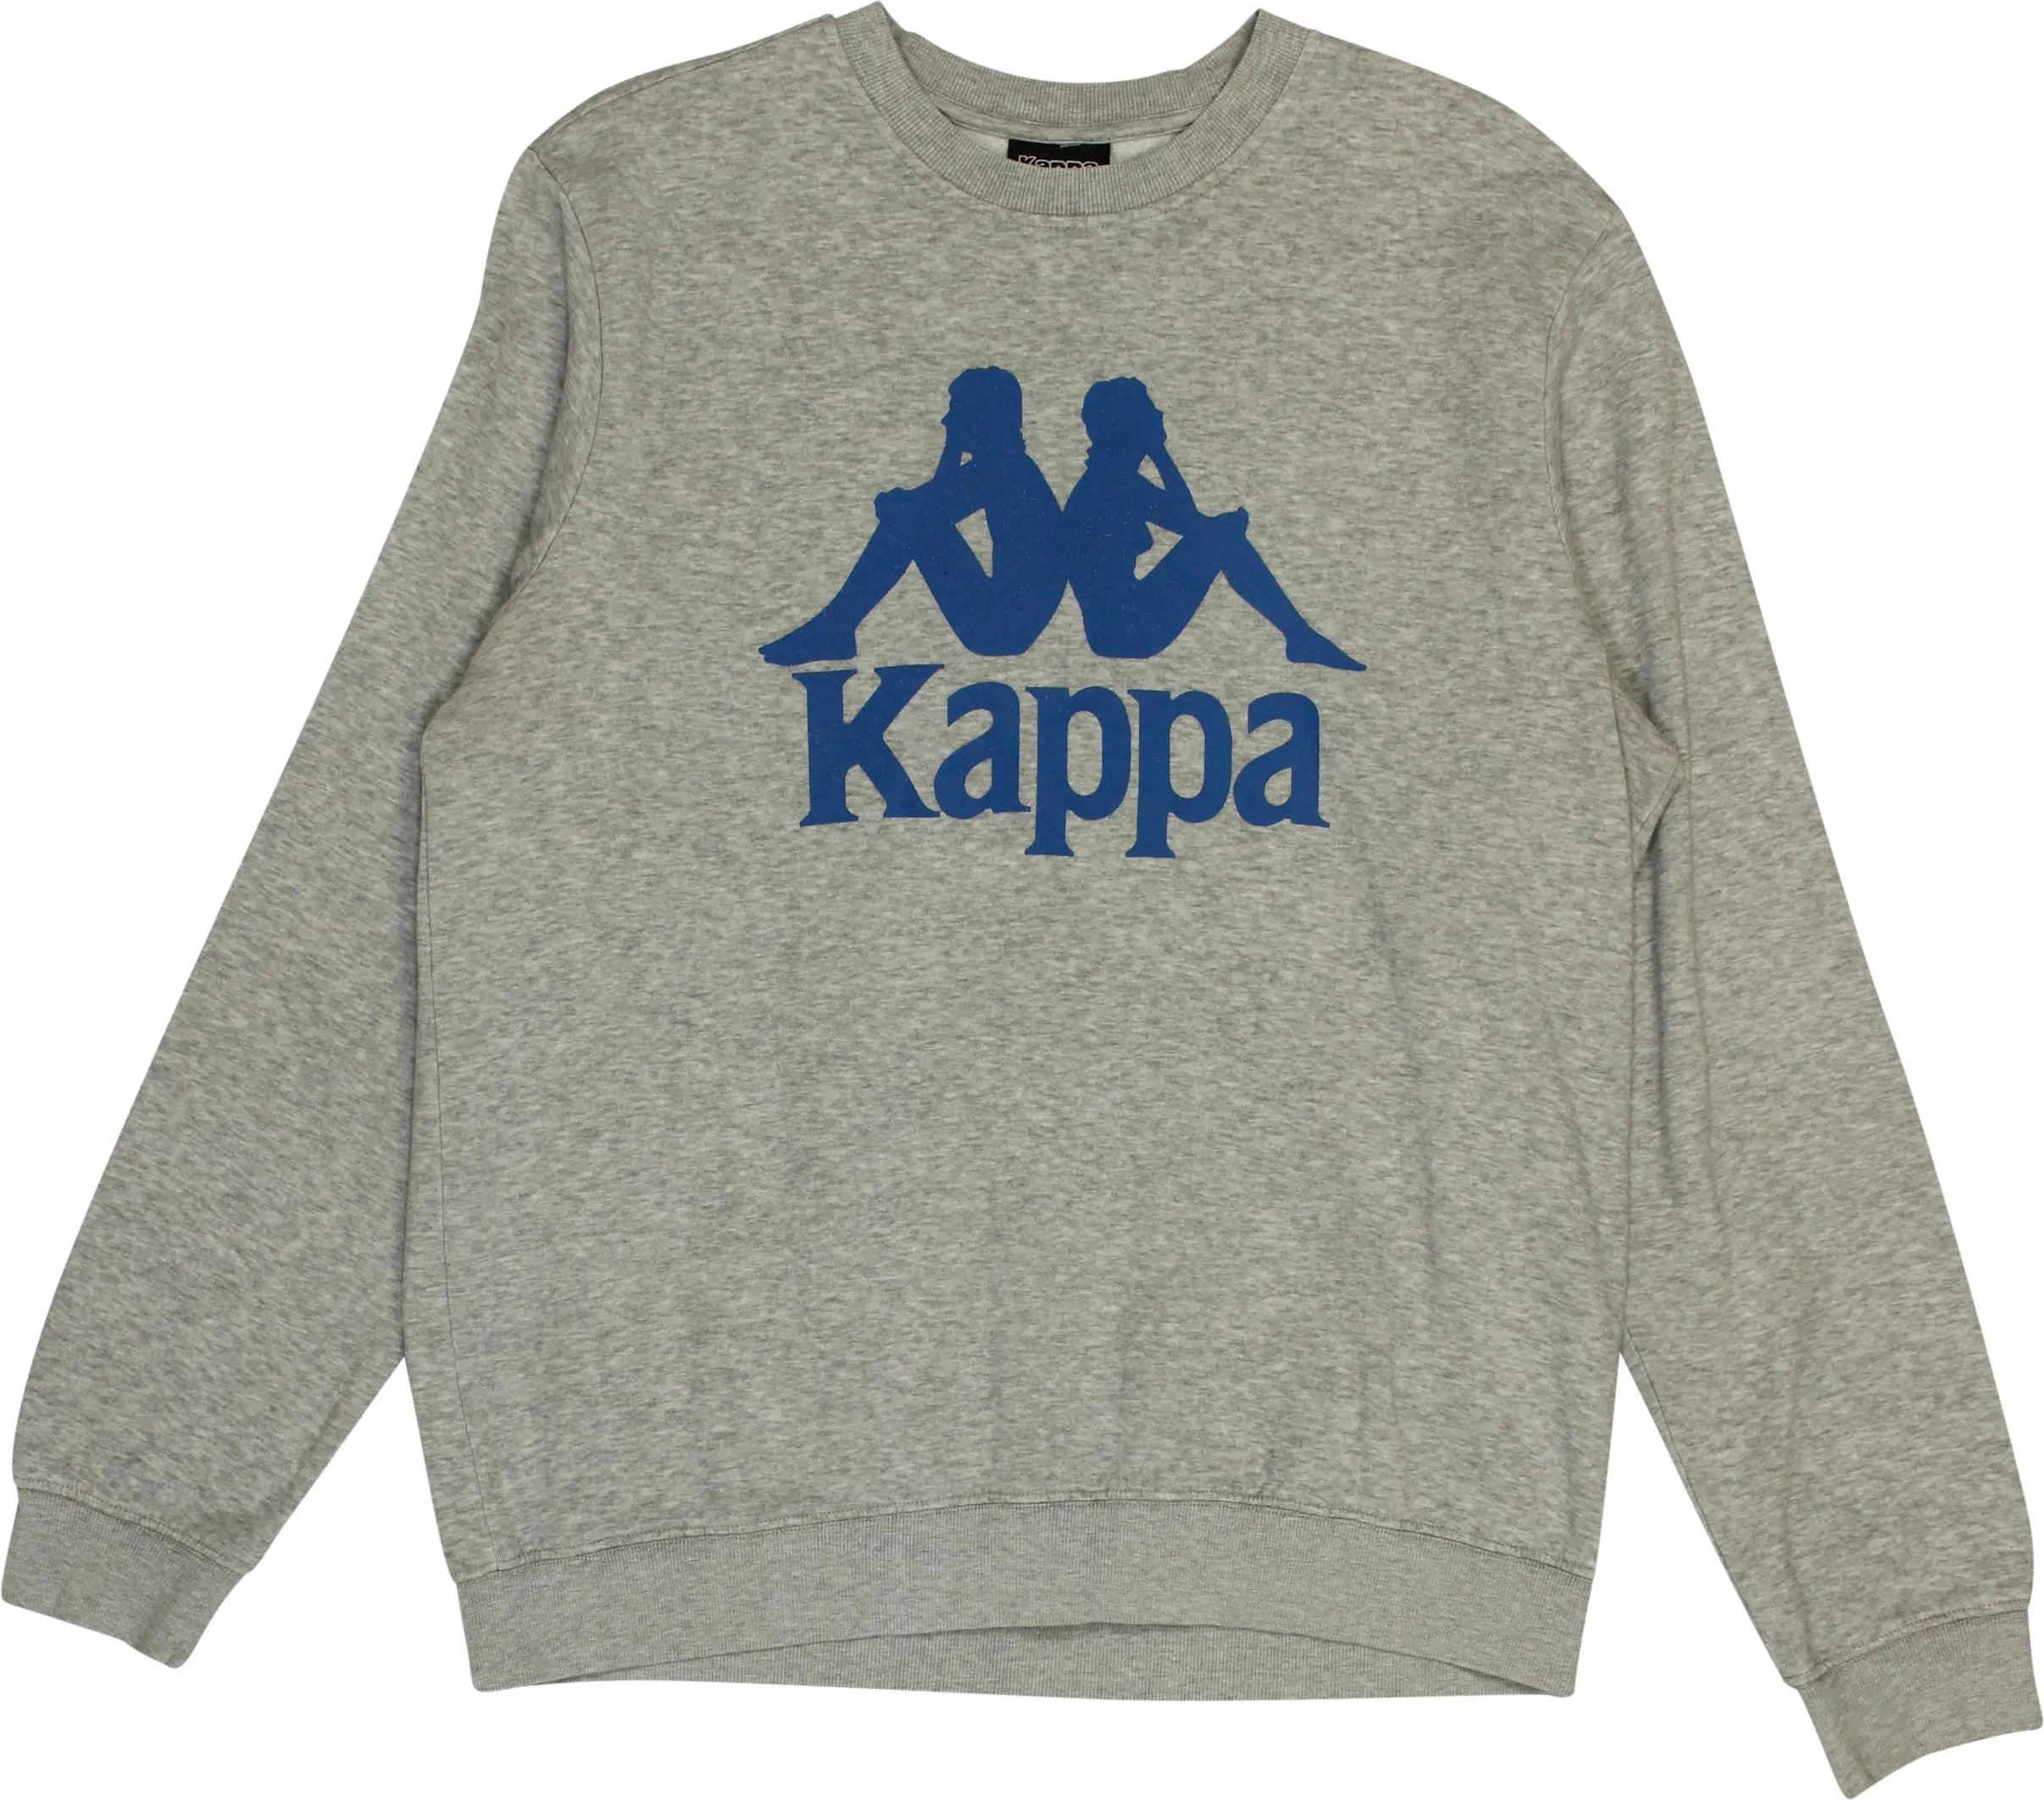 Kappa - Kappa Sweater- ThriftTale.com - Vintage and second handclothing